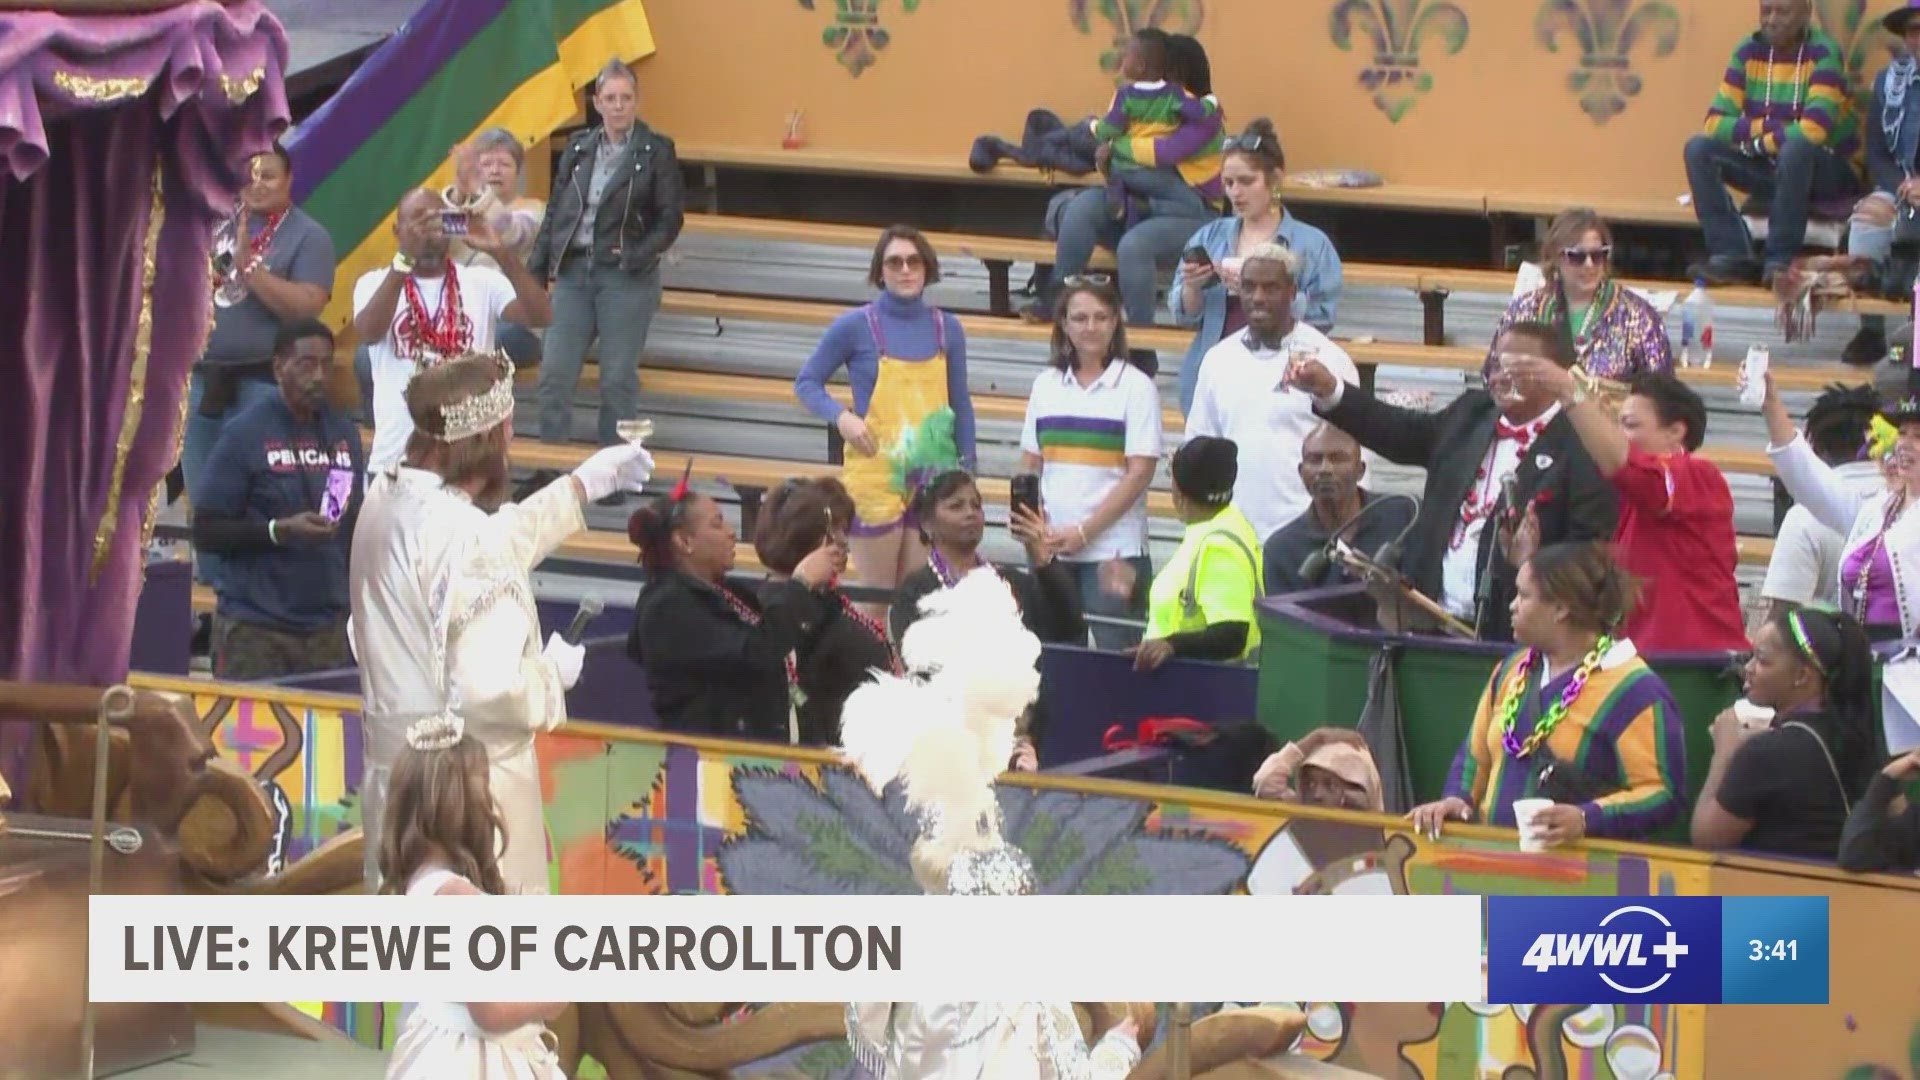 The King of Krewe of Carrollton toasts to 100 years of parade memories and Mayor Cantrell gifts him the key to New Orleans